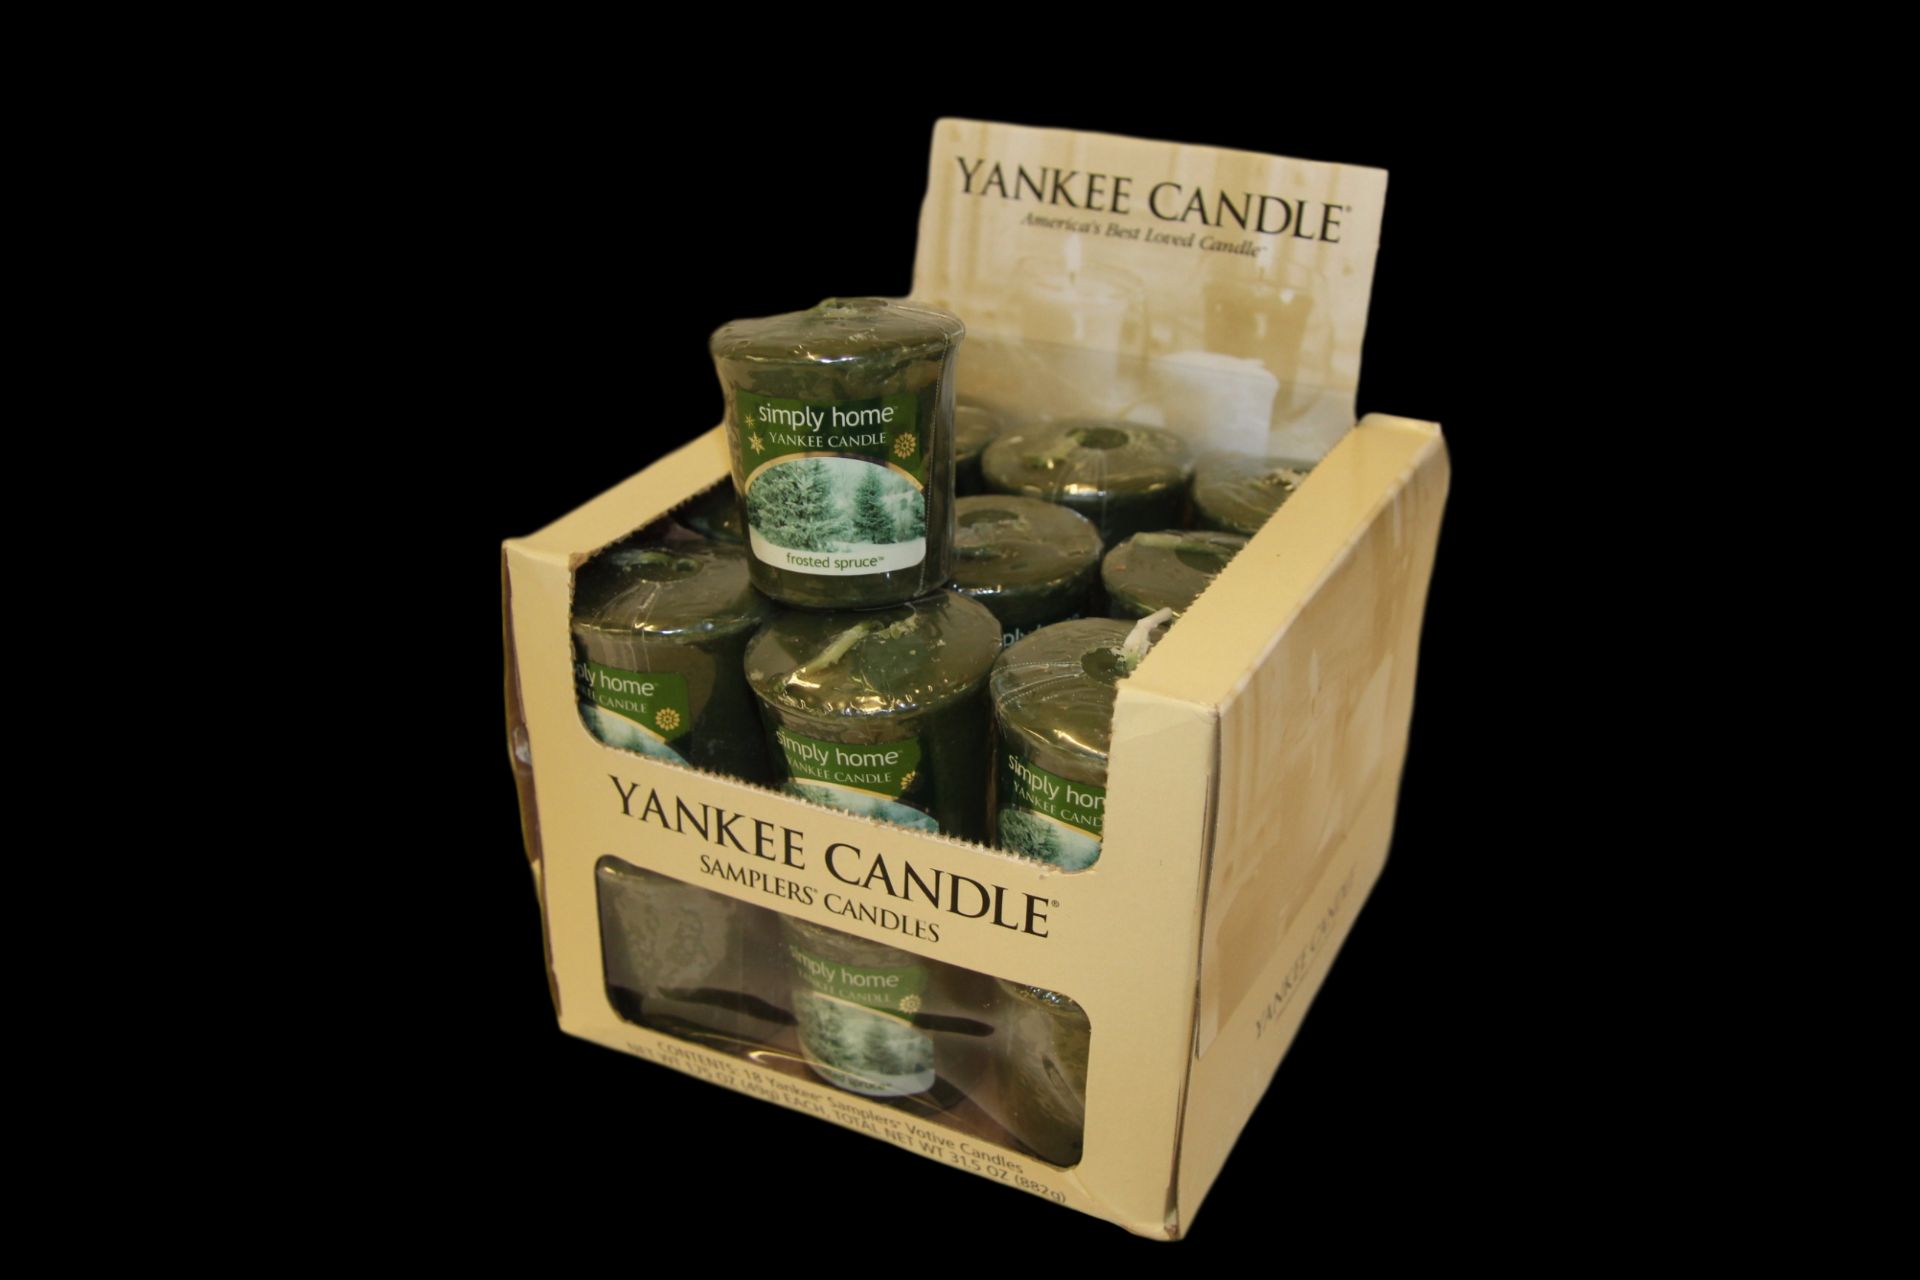 V *TRADE QTY* Brand New 18 x Yankee Candle Votive Frosted Spruce 49g eBay Price £19.99 X 25 YOUR BID